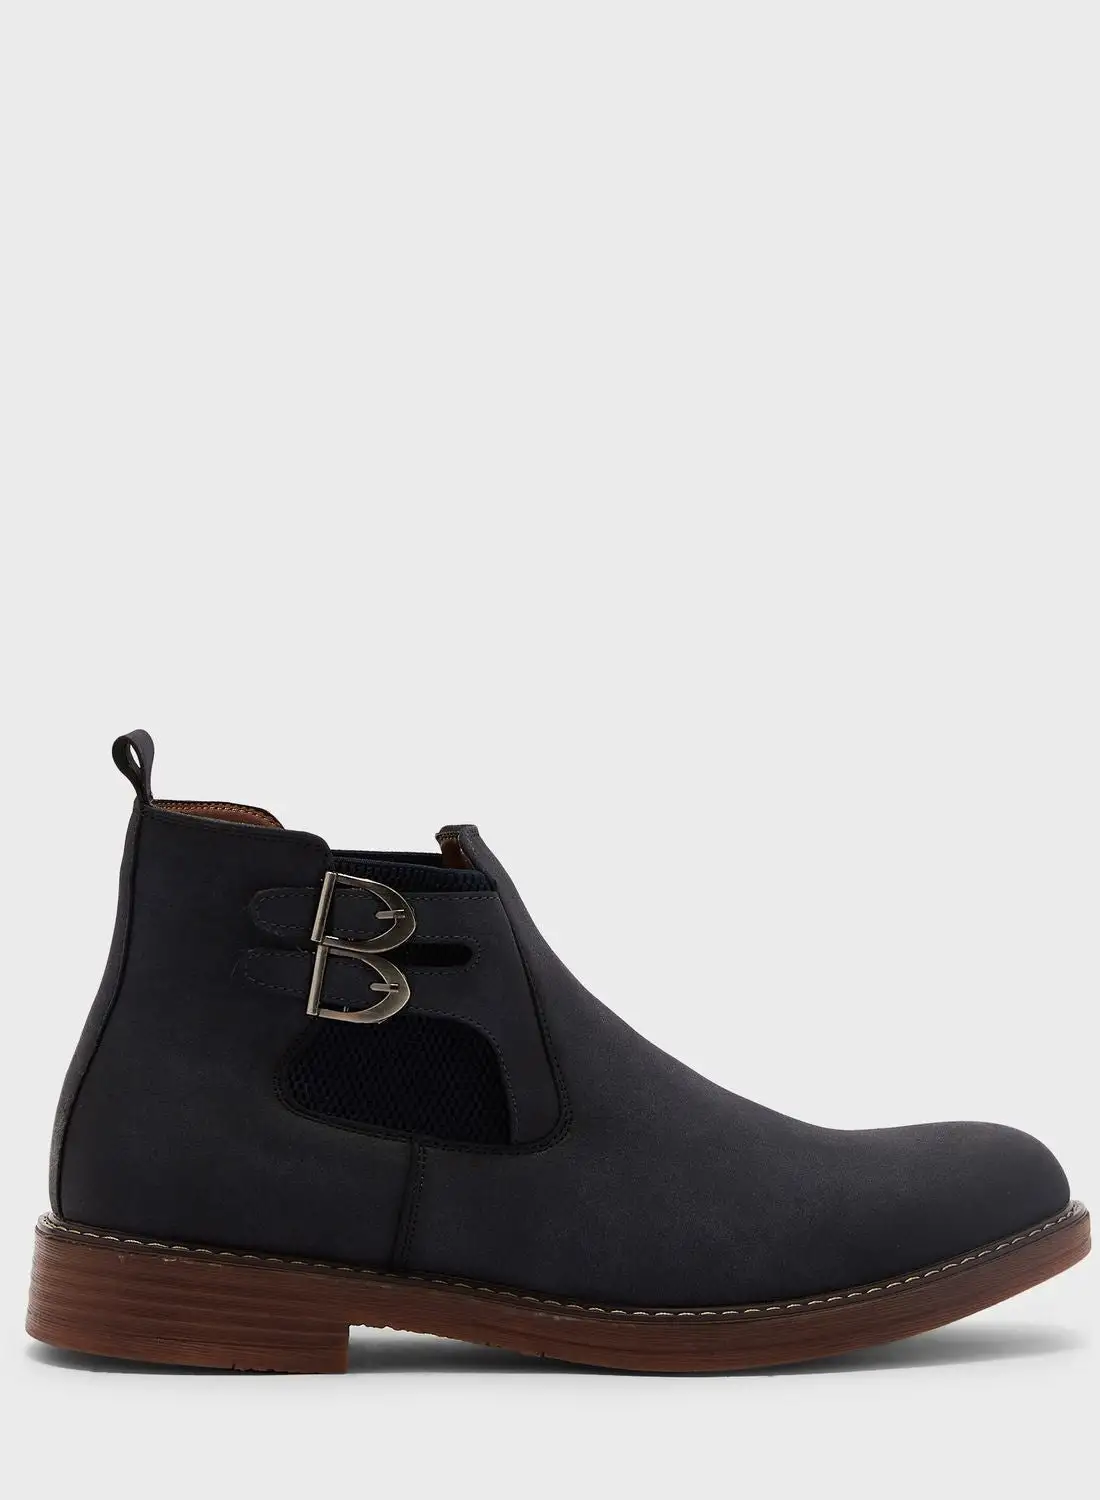 Robert Wood Casual Pull On Boots